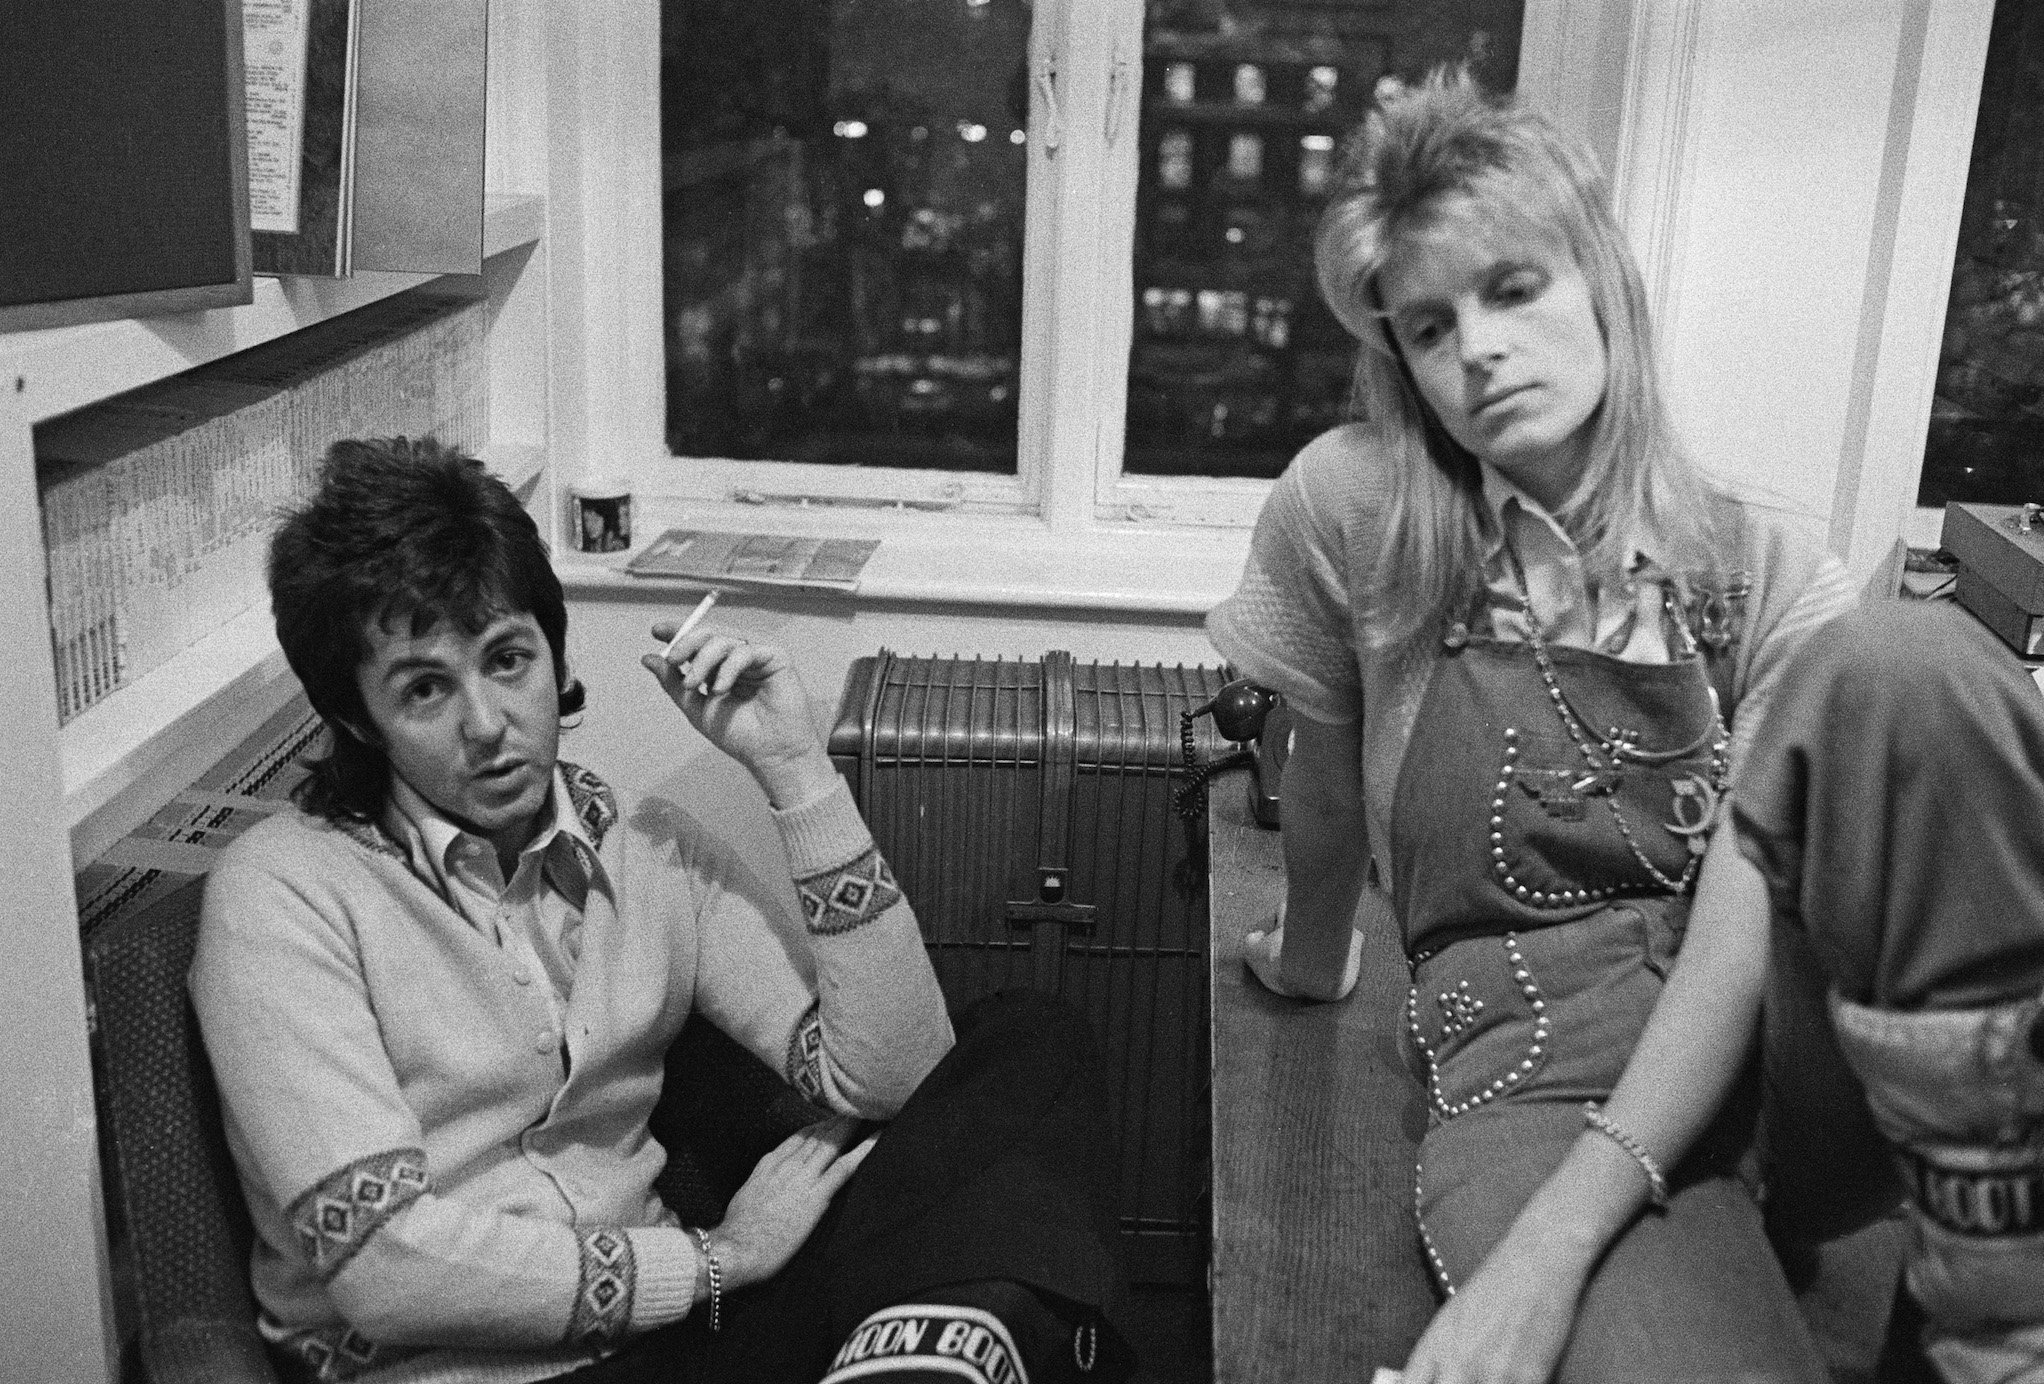 Paul McCartney of The Beatles with his wife, Linda